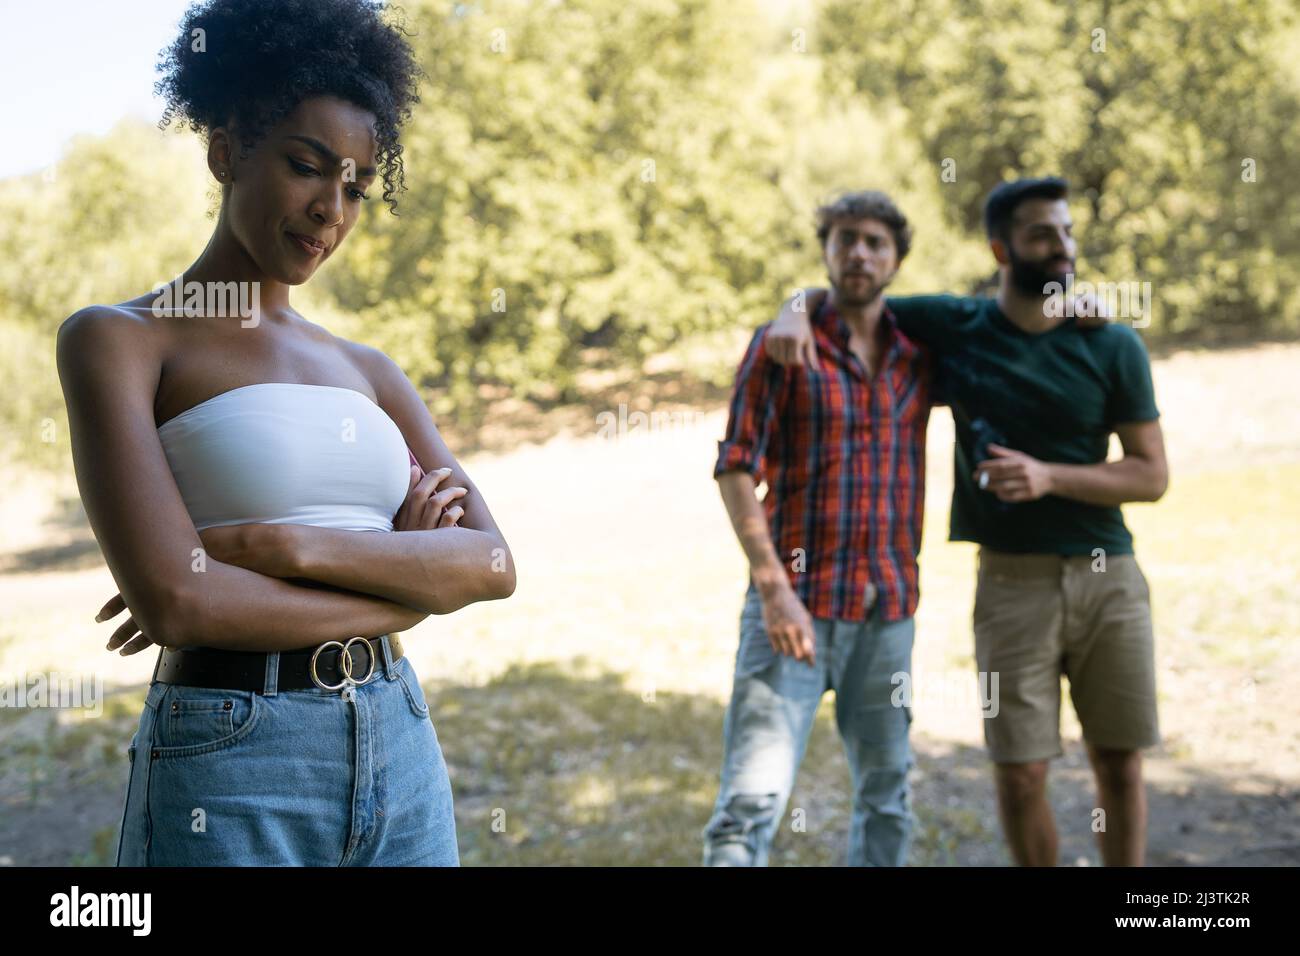 A girl of African descent with folded arms is bullied by two young men in an outdoor park. Concept of bullying, racism among young people. Stock Photo